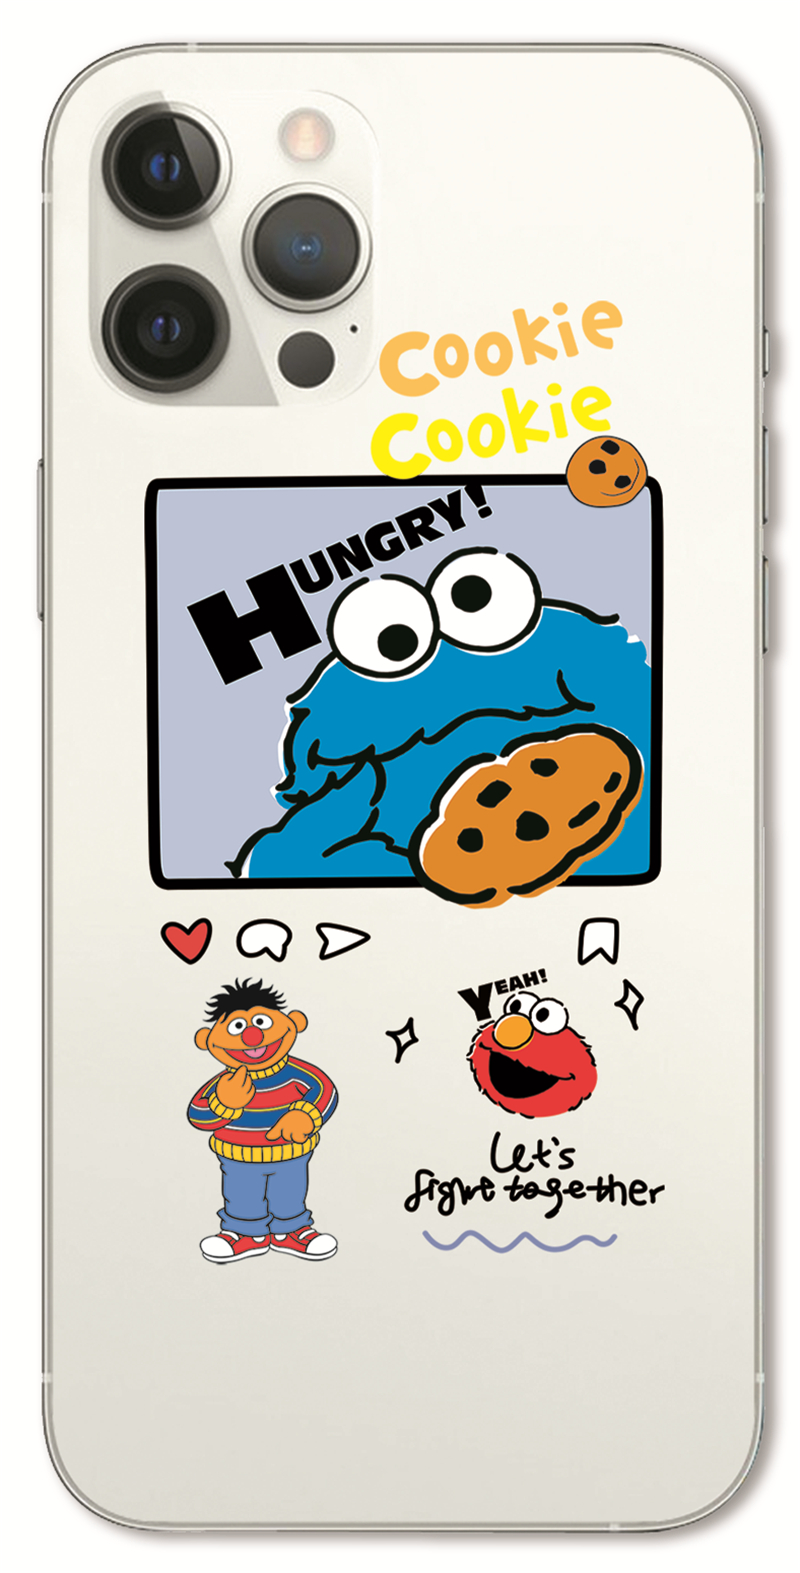 Samsung Galaxy S3 S4 S5 Mini Cartoon Case Silicone TPU Back Cover Printed Soft Mobile Phone Casing